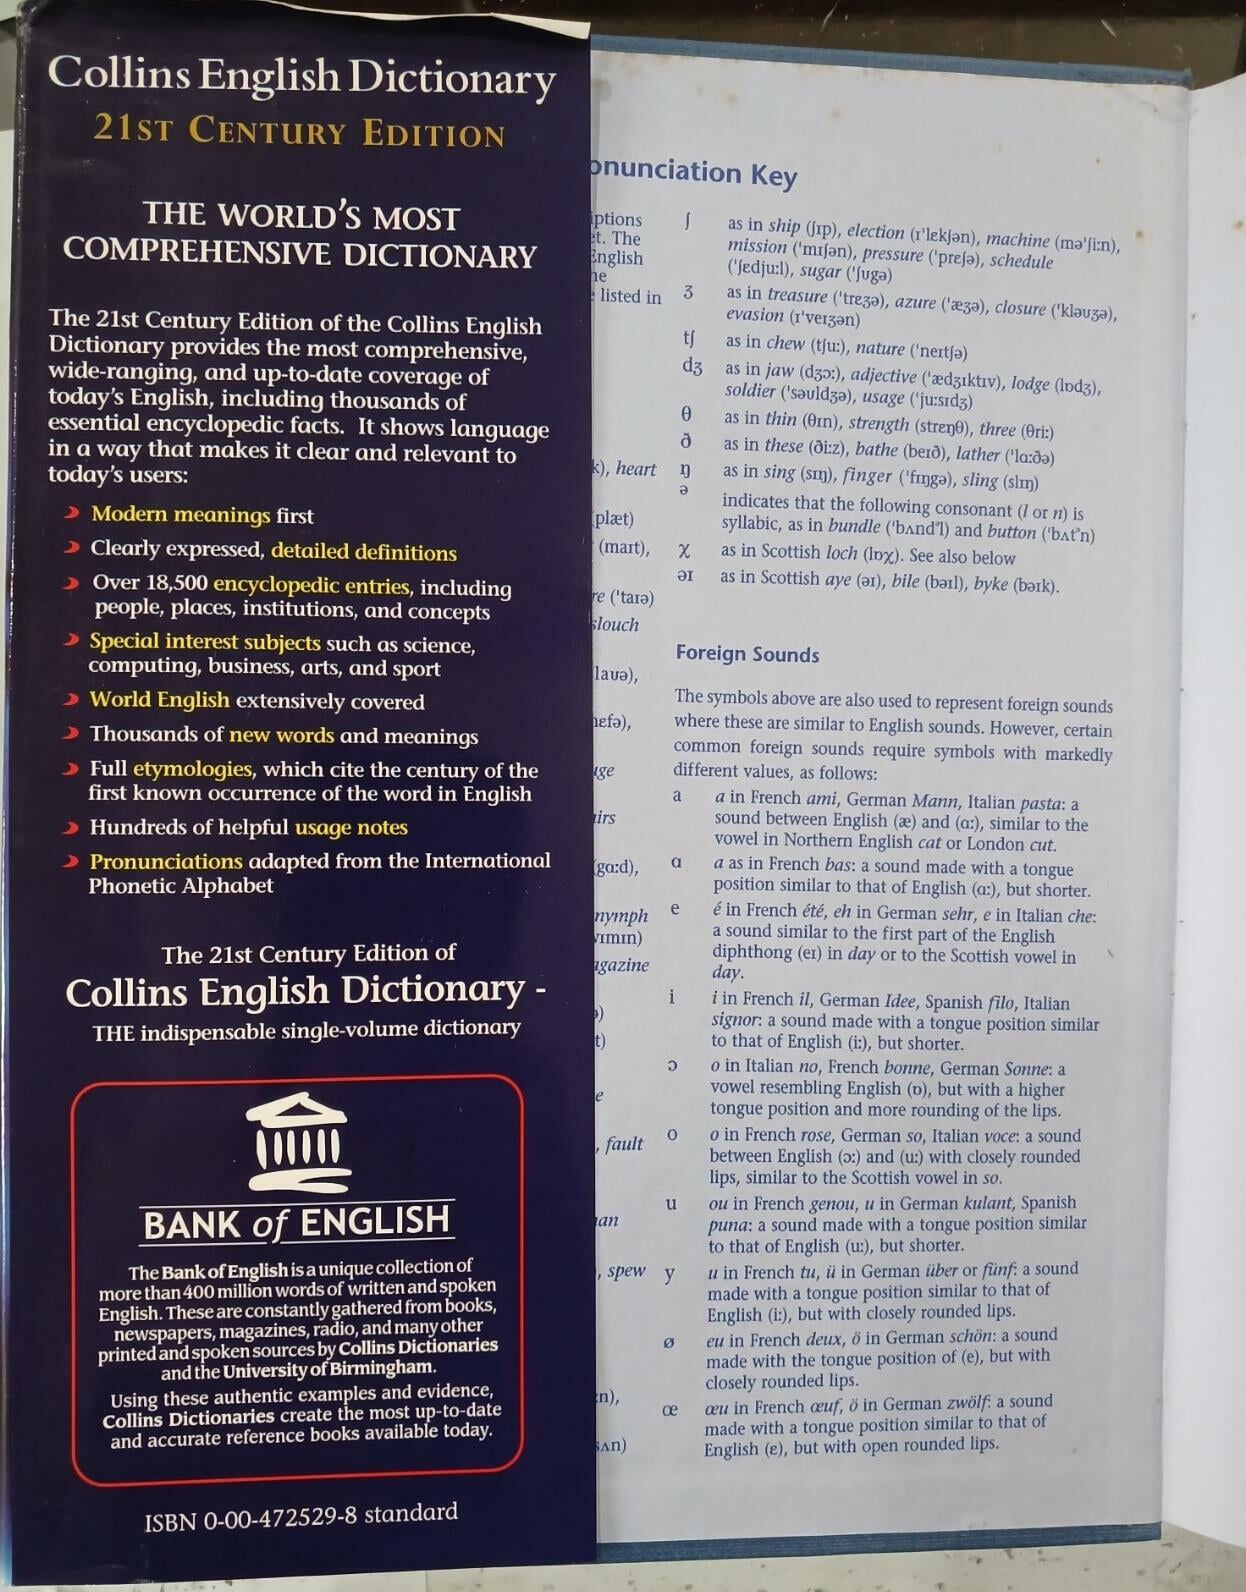 Collins English Dictionary (21st Century Edition)